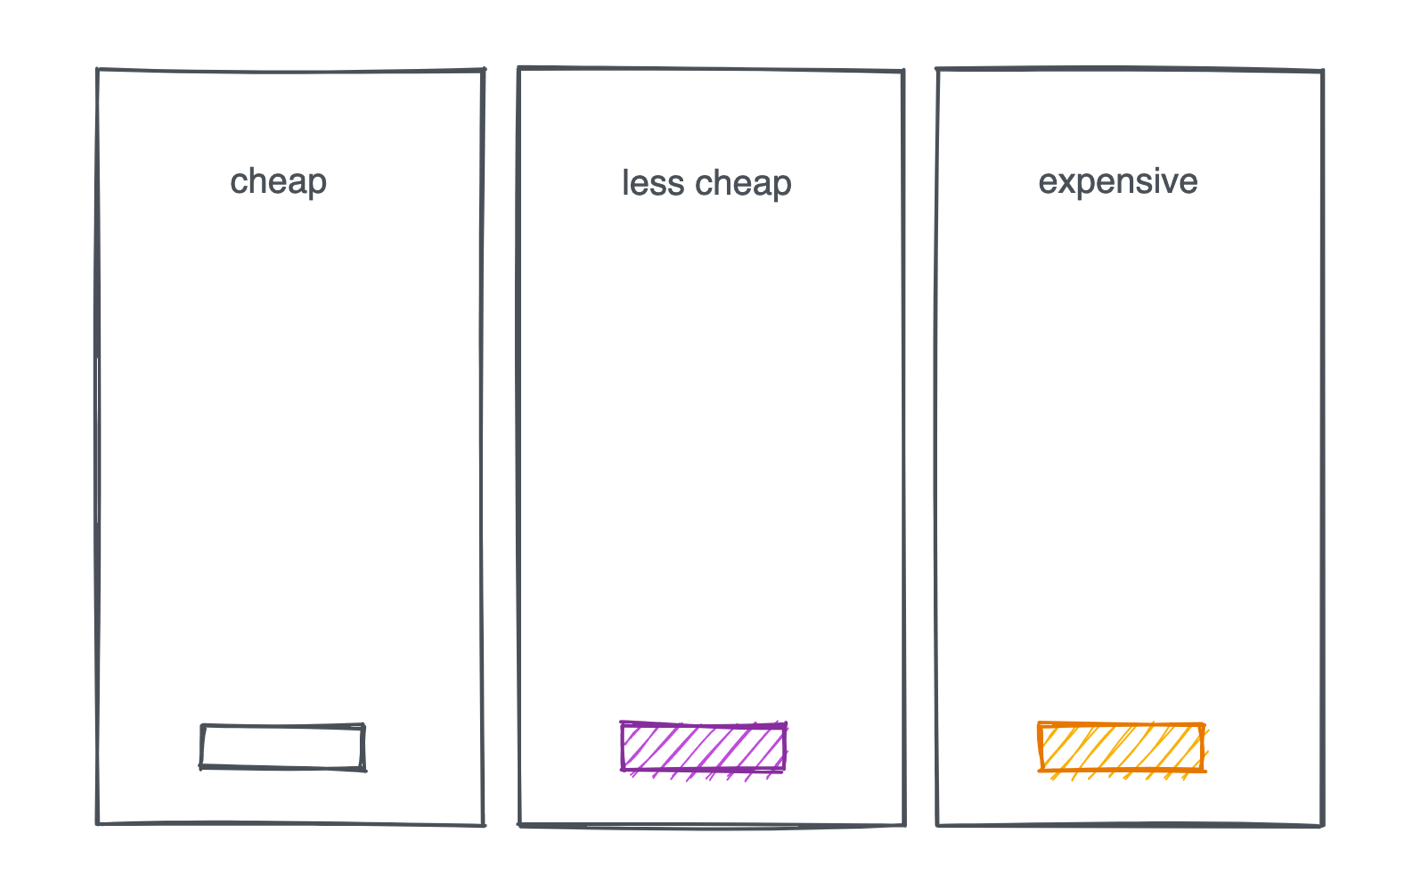 A mockup of a typical SaaS pricing page, with three columns: cheap, less cheap, and expensive.